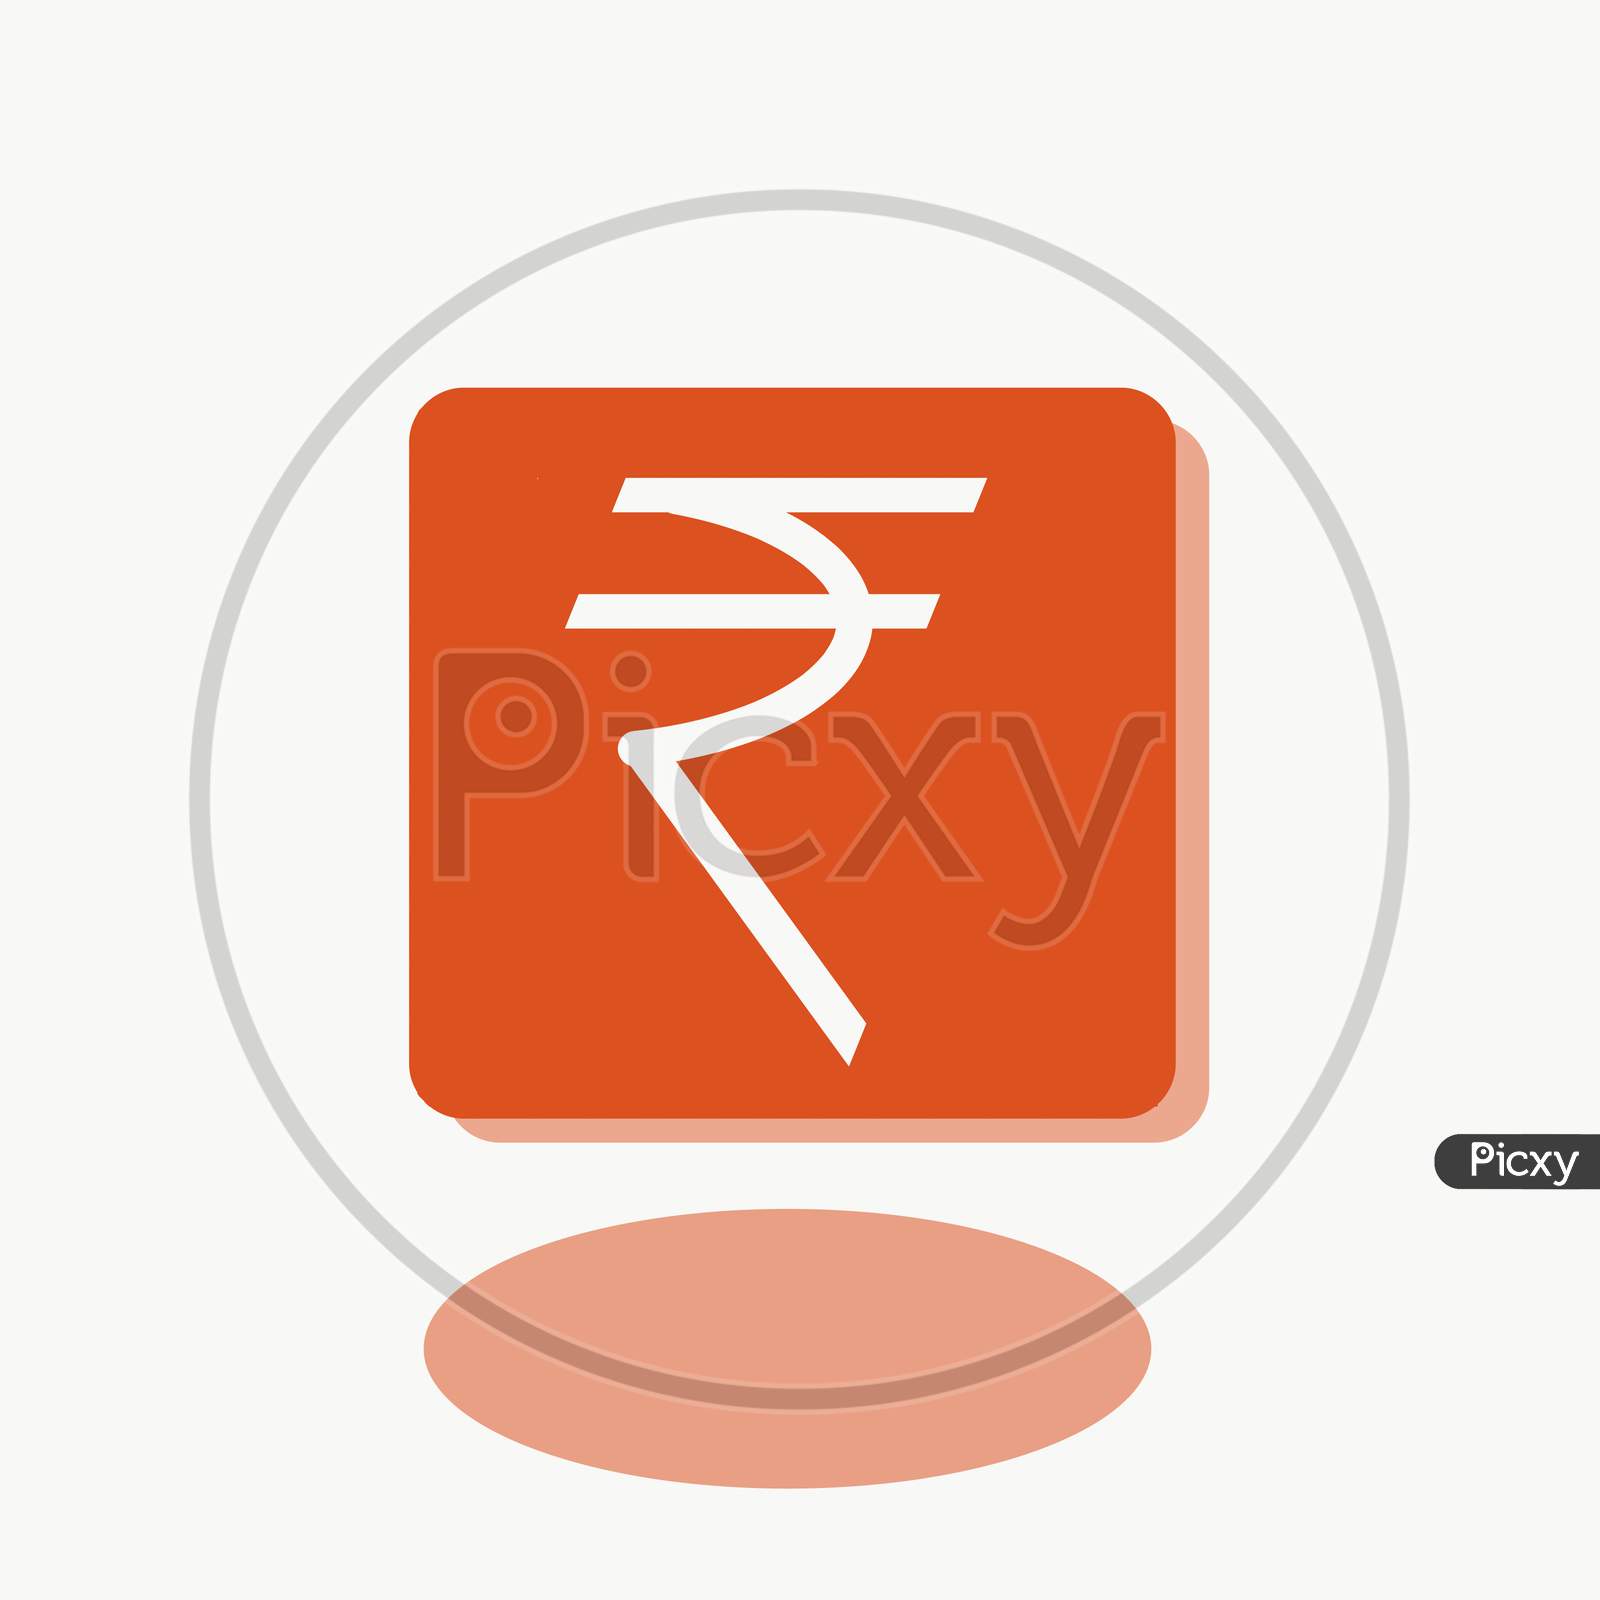 White Color Rupee Sign With Orange Cubes And Shadow